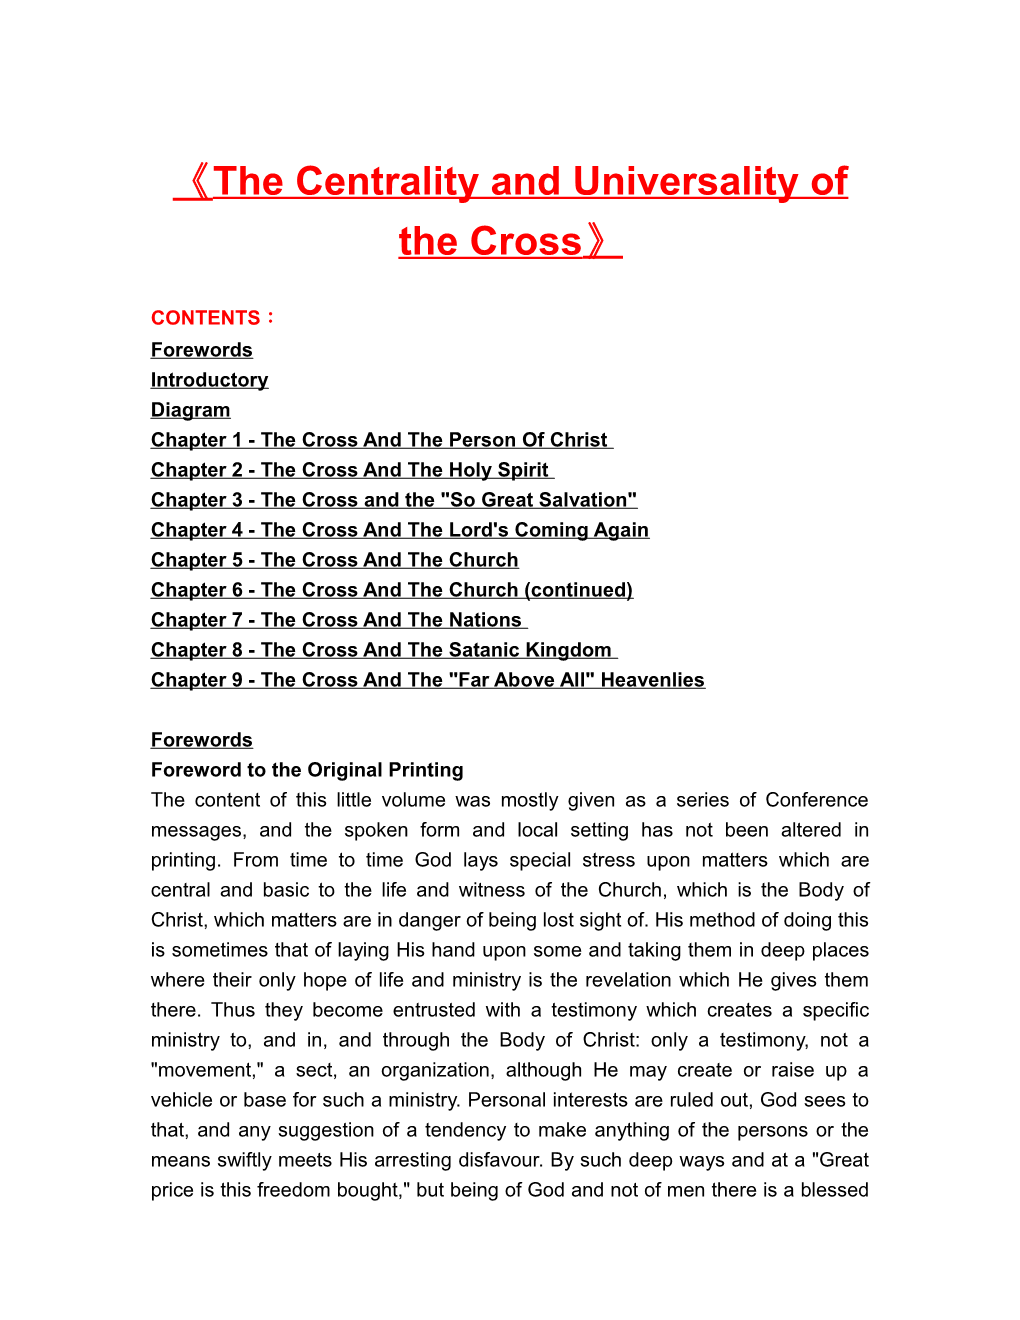 The Centrality and Universality of the Cross